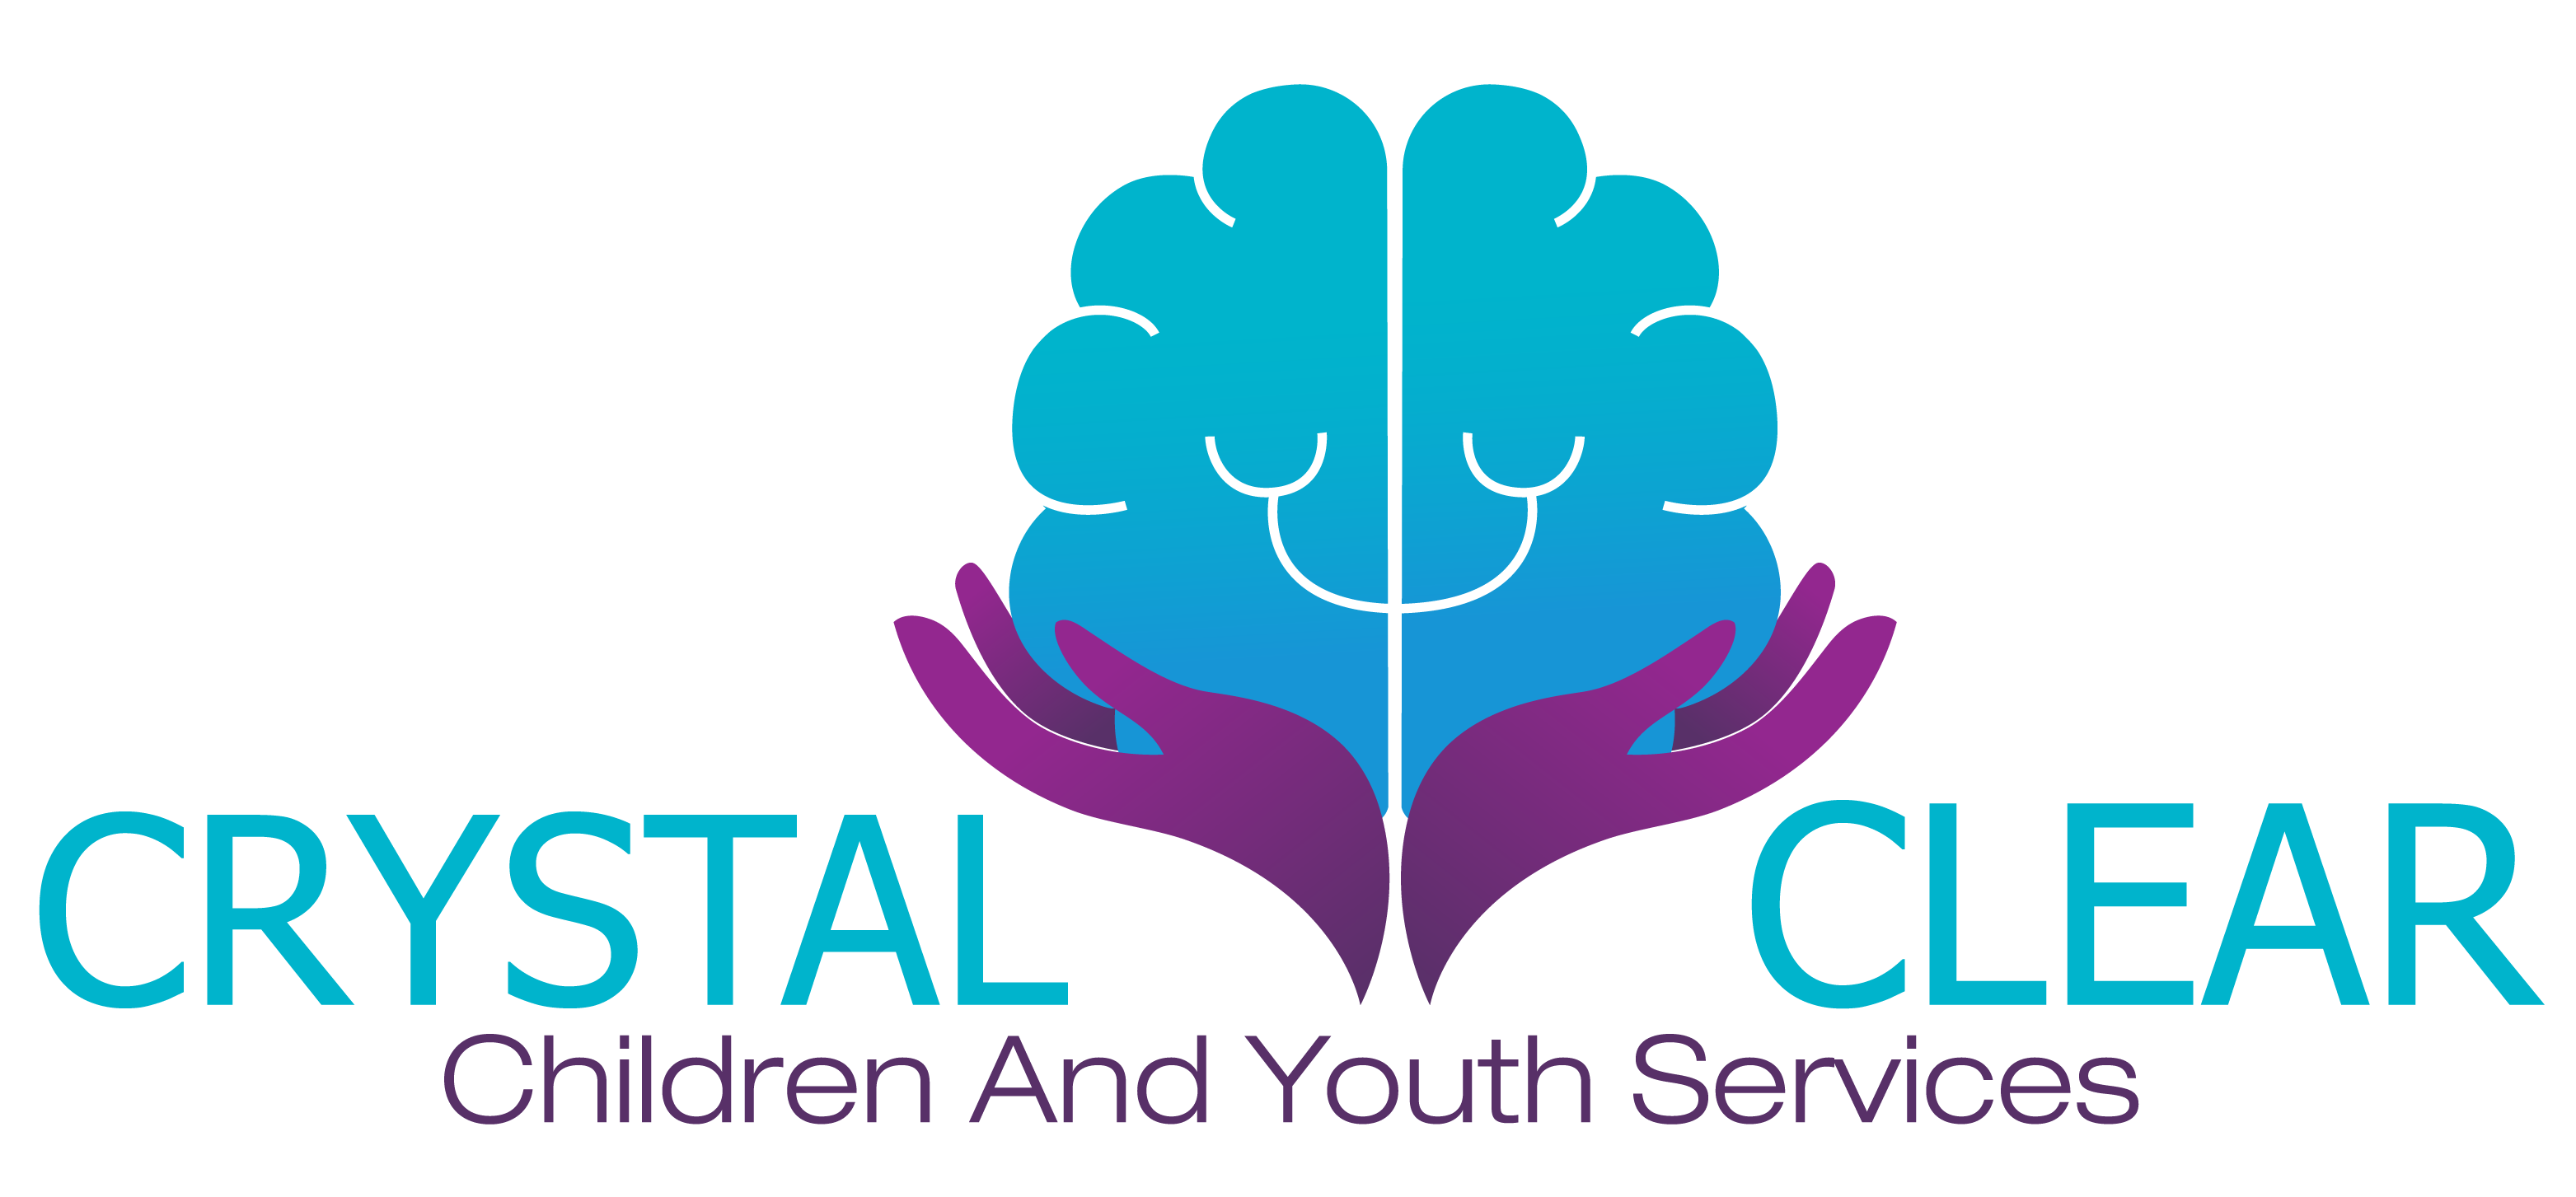 Building – Crystal Clear Children And Youth Services